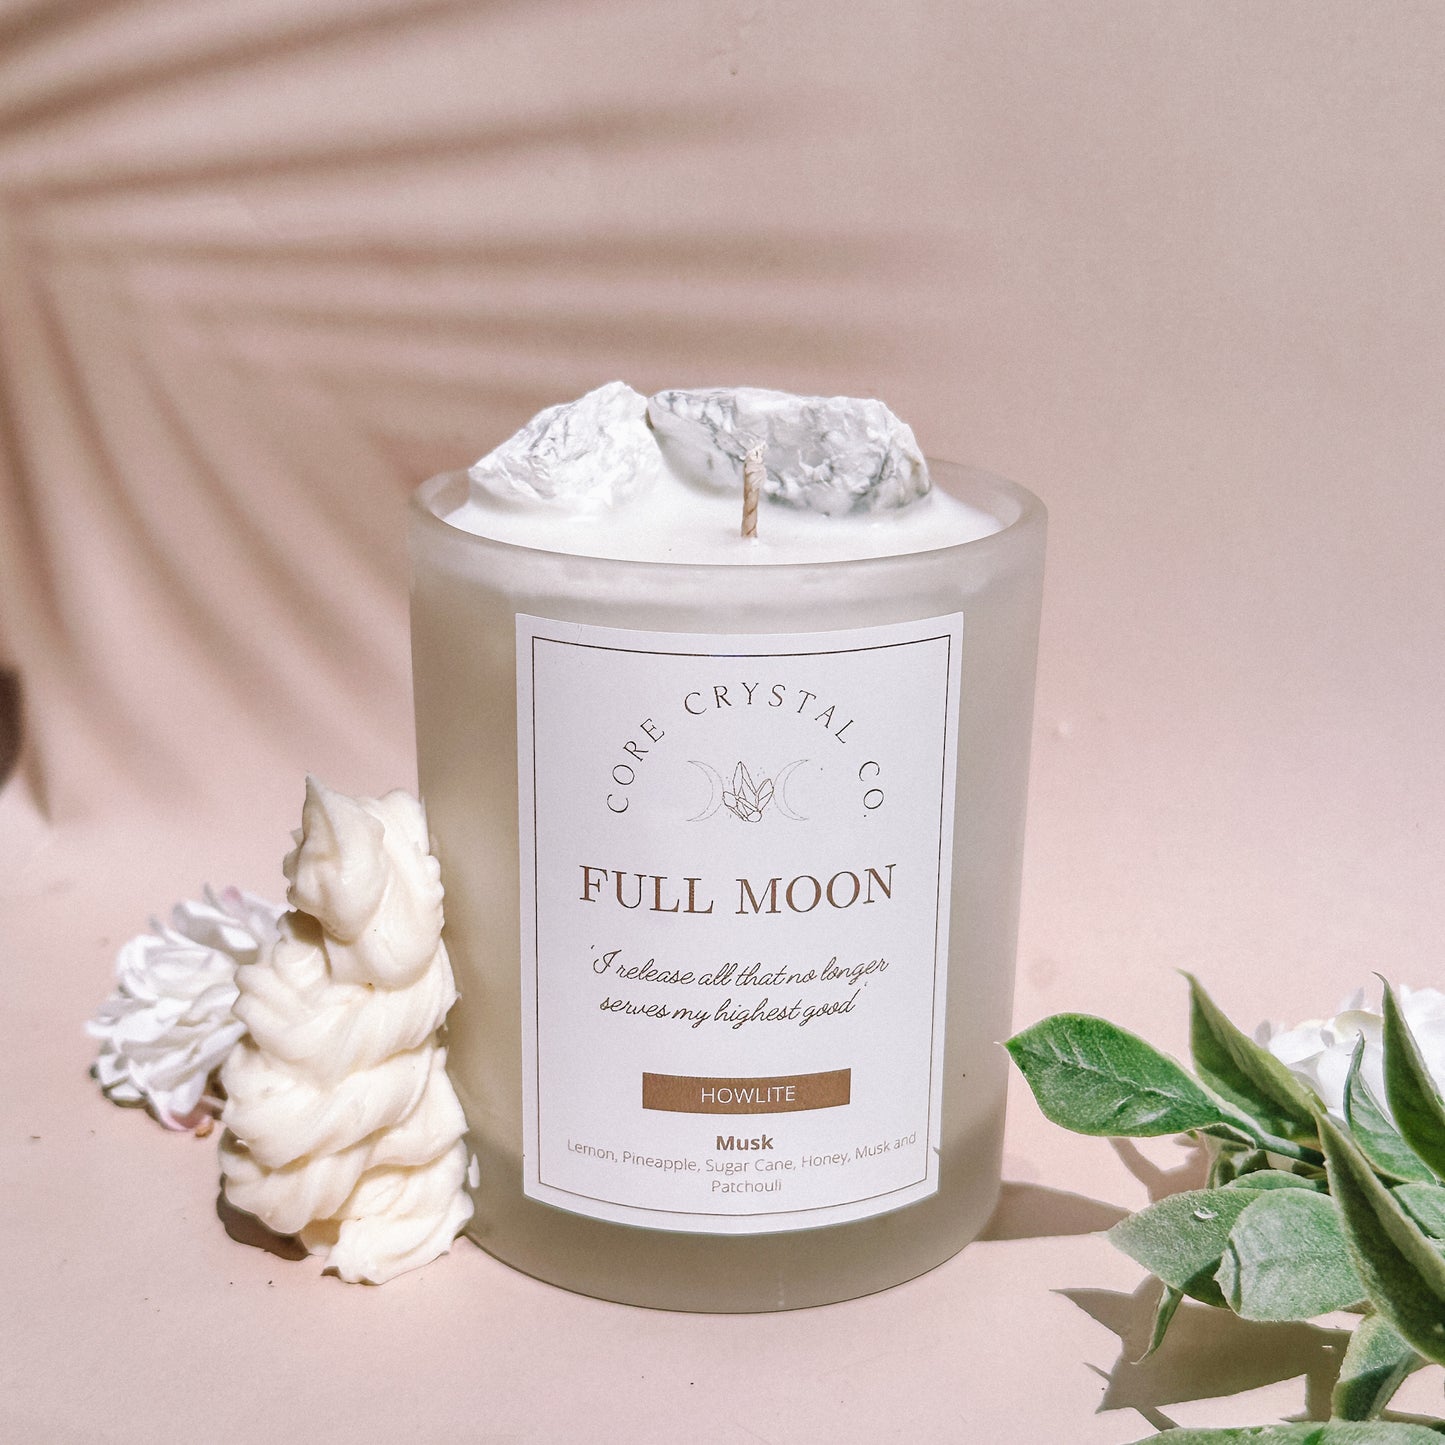 FULL MOON White Musk Crystal Infused Candle